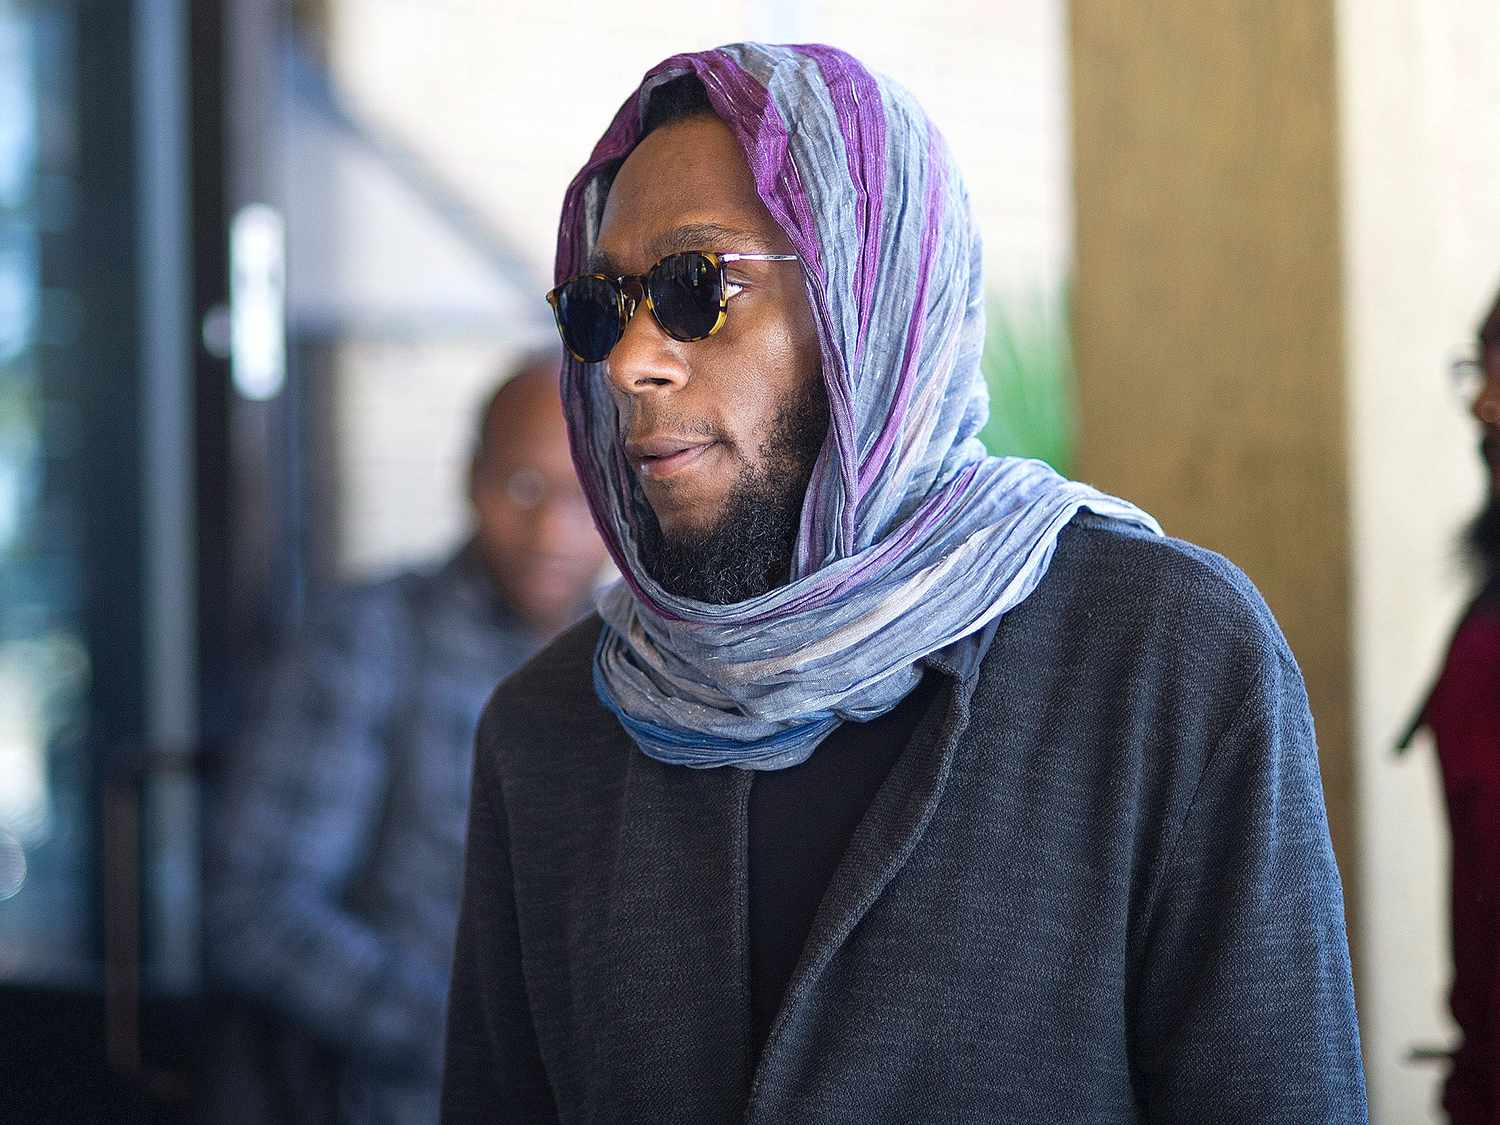 Mos Def Net Worth - A Look At The Wealth Of The Renowned Rapper And Actor